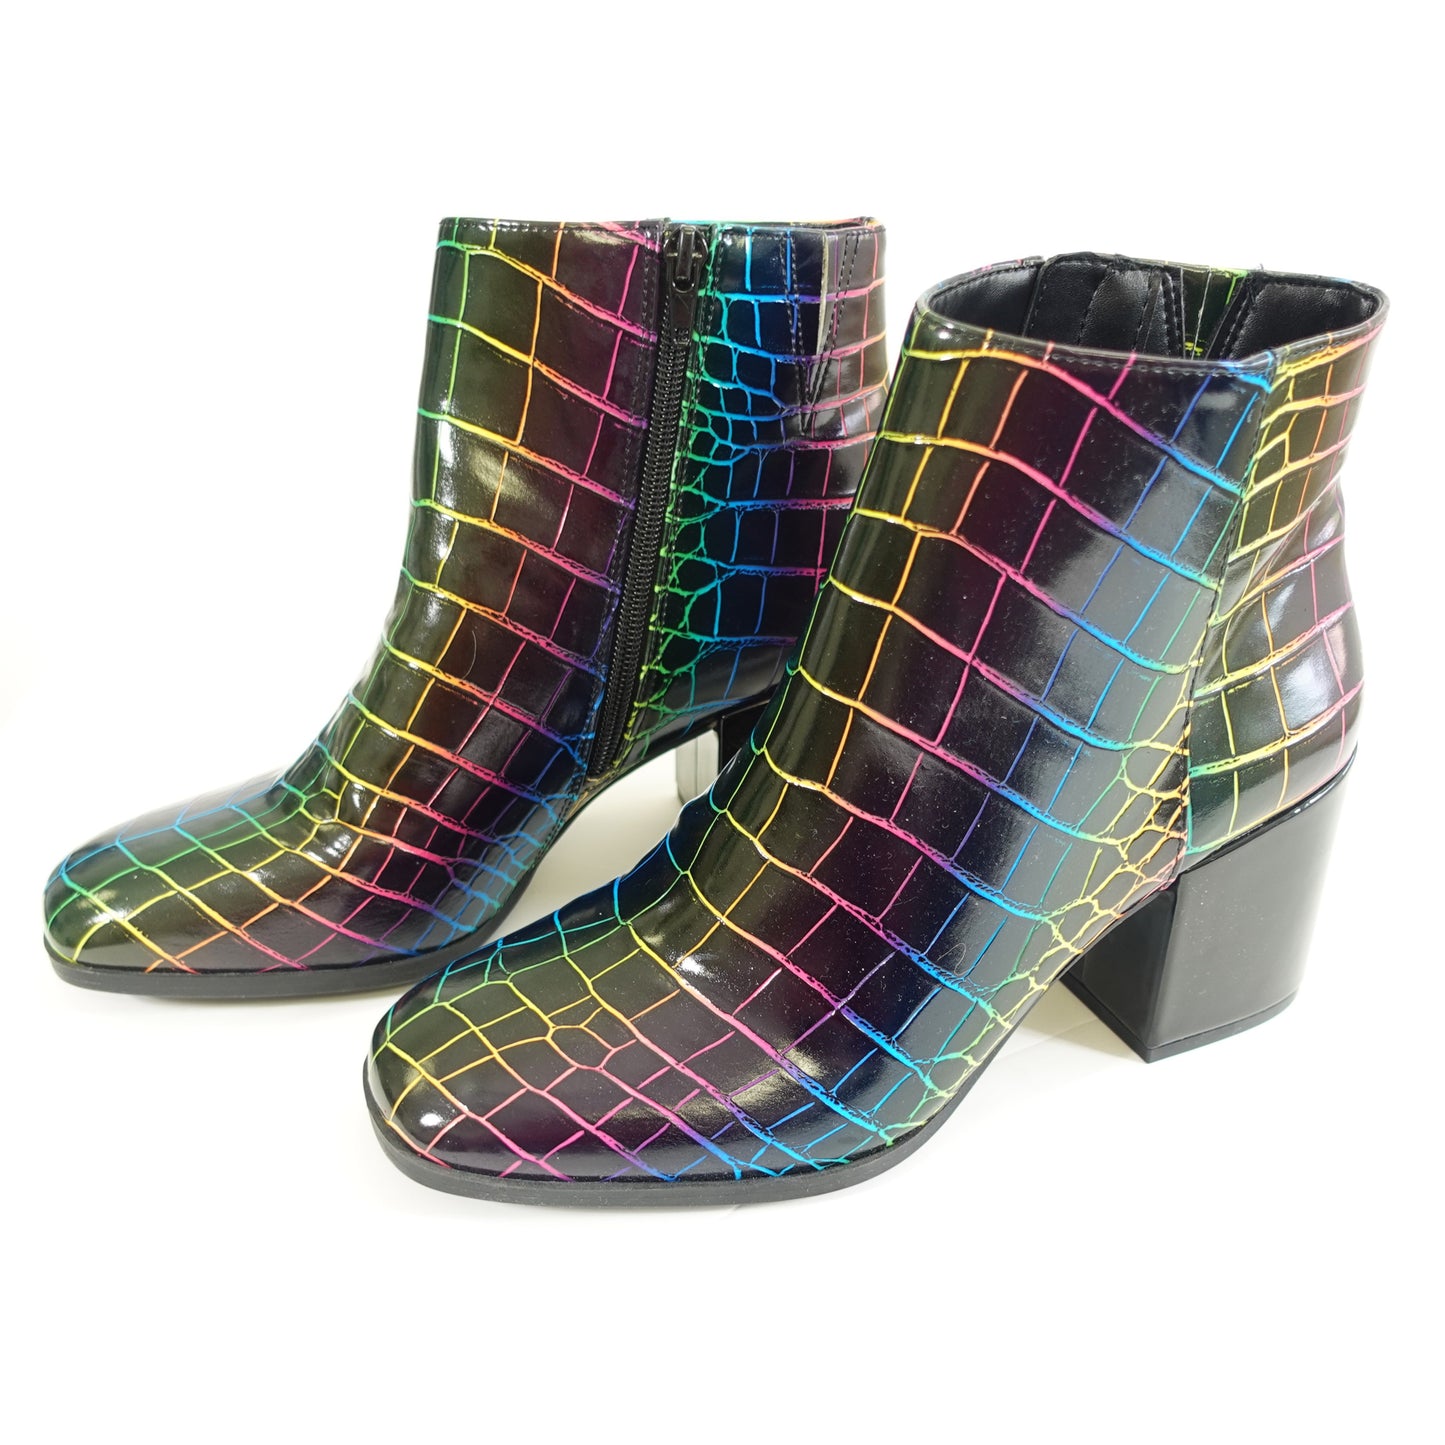 Black/ Rainbow Faux Alligator Skin Ankle Boot (Size 9)